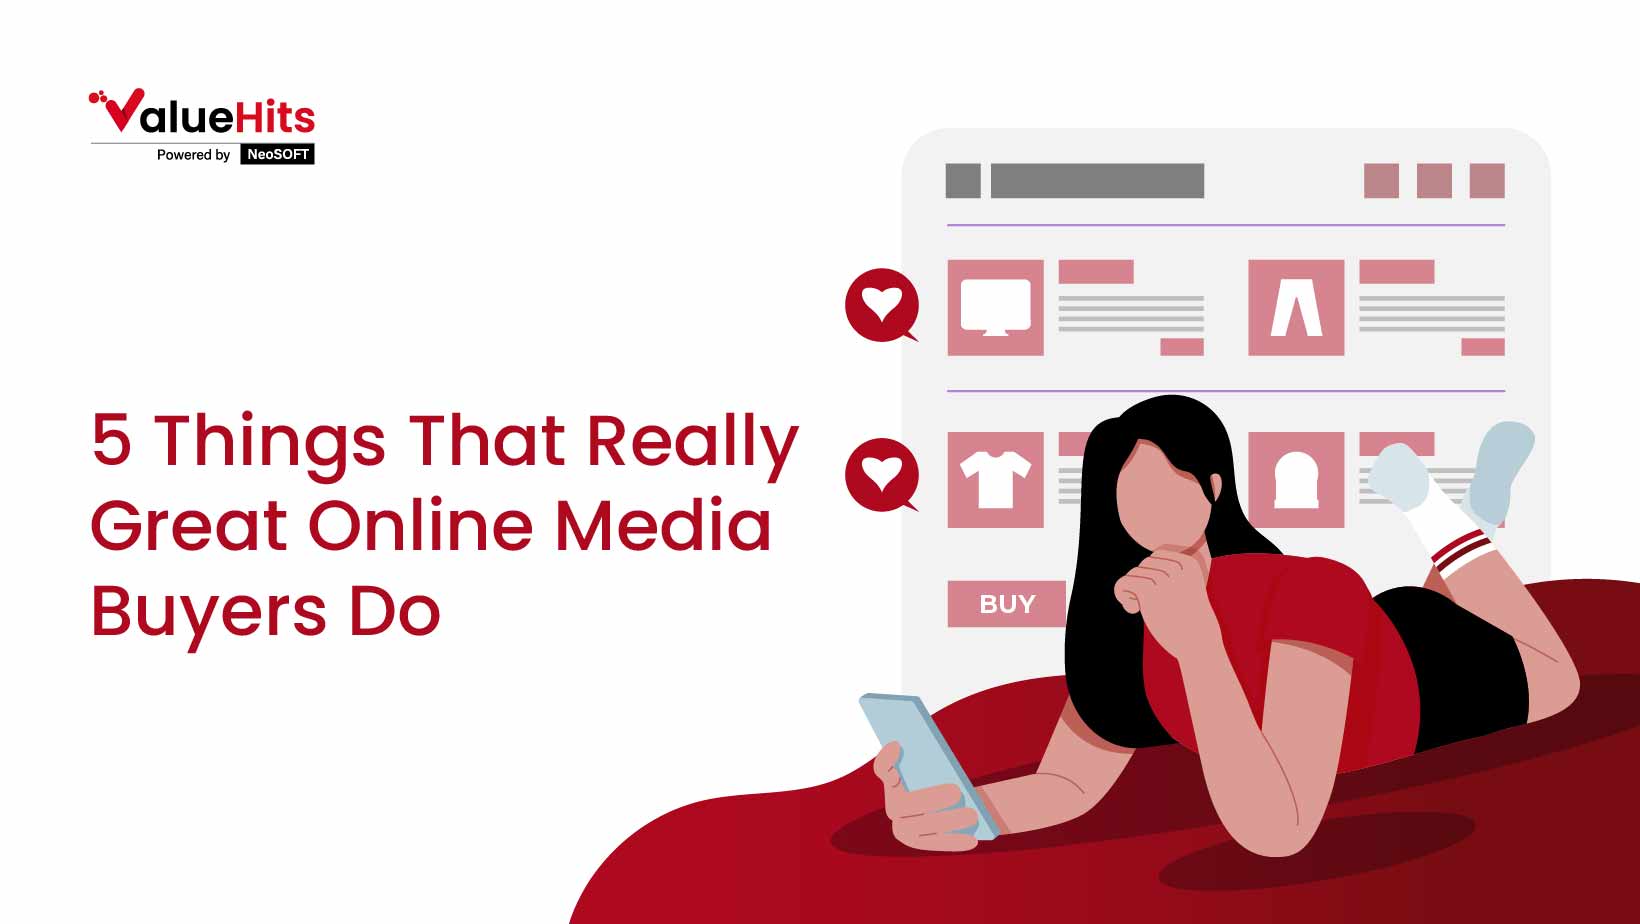 5 Things That Really Great Online Media Buyers Do